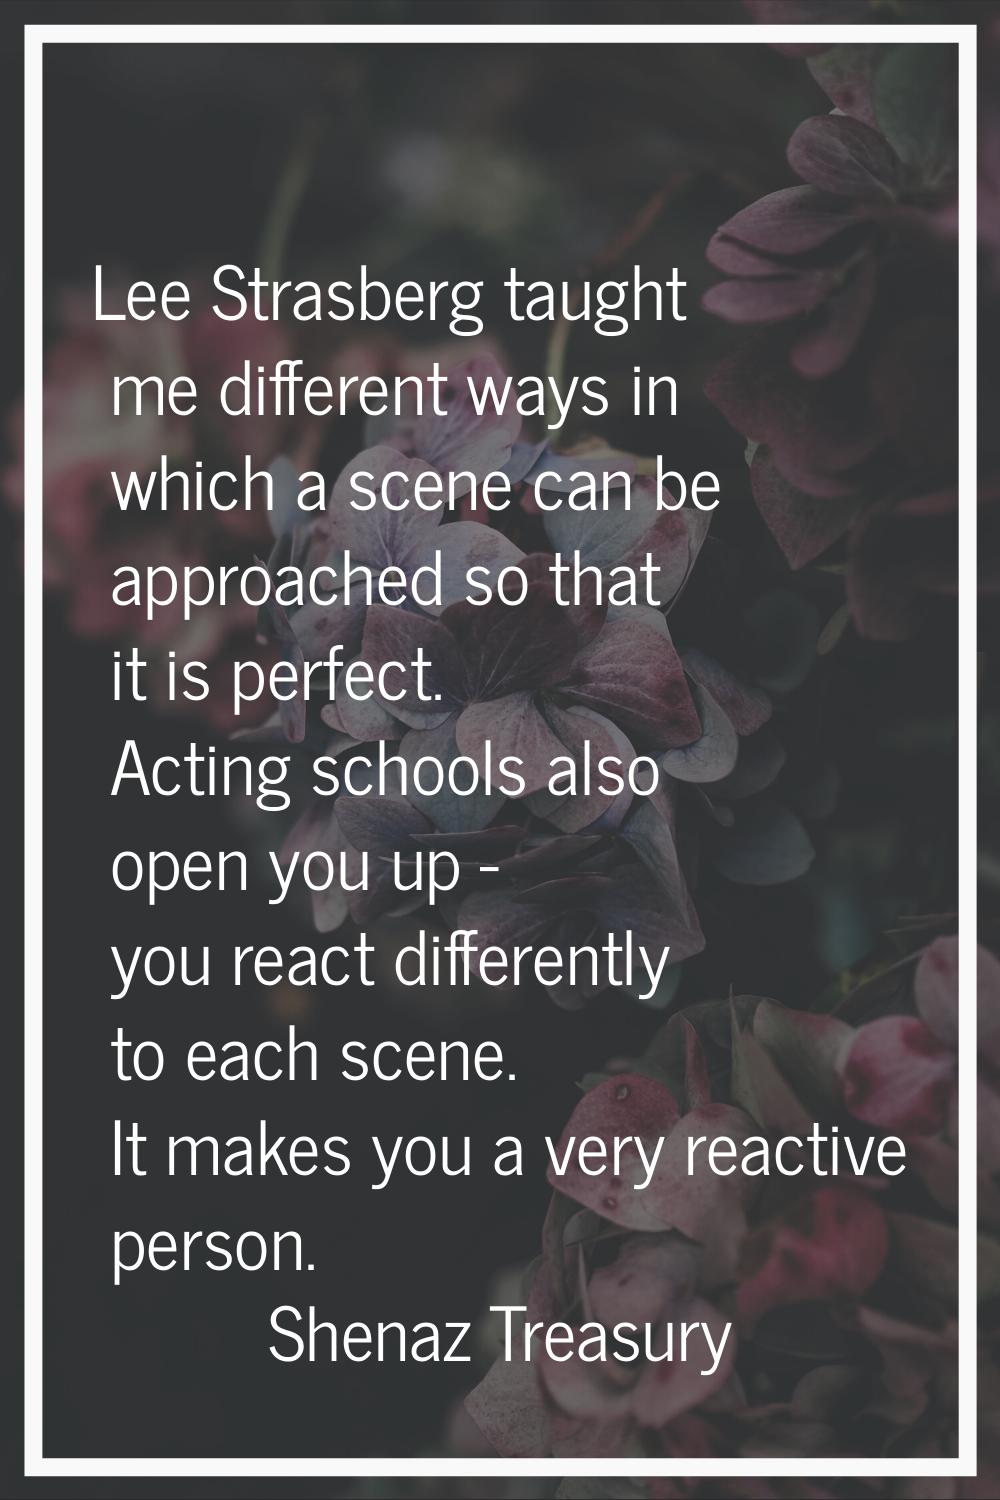 Lee Strasberg taught me different ways in which a scene can be approached so that it is perfect. Ac